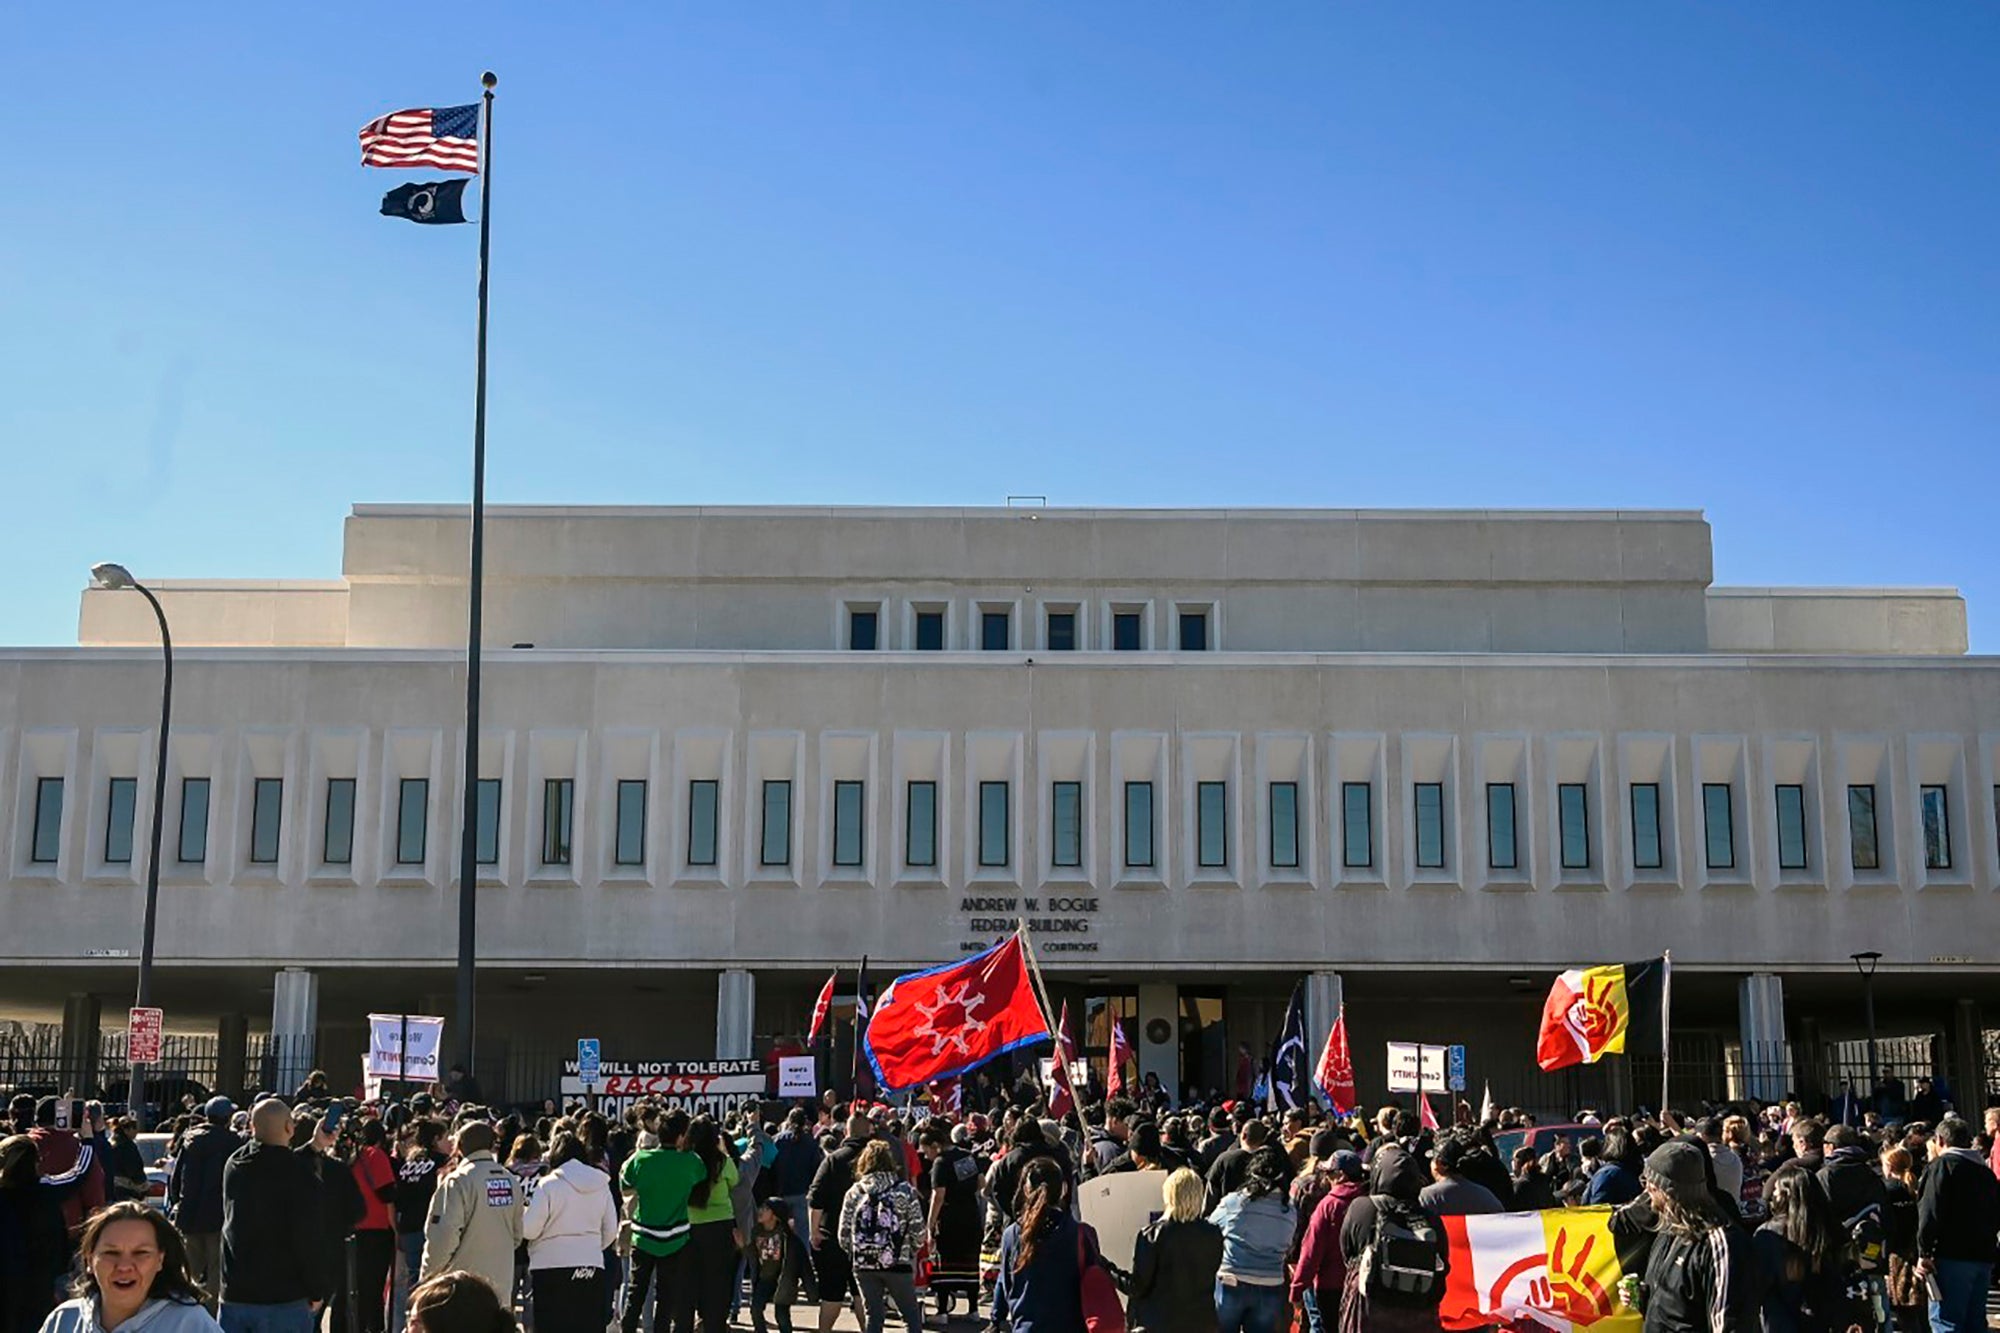 Demonstrators gather outside the Andrew W. Bogue Federal building on Wednesday, March 23, 2022, in Rapid City, where it was announced that a federal civil rights lawsuit was filed against the Grand Gateway Hotel for denying services to Native Americans